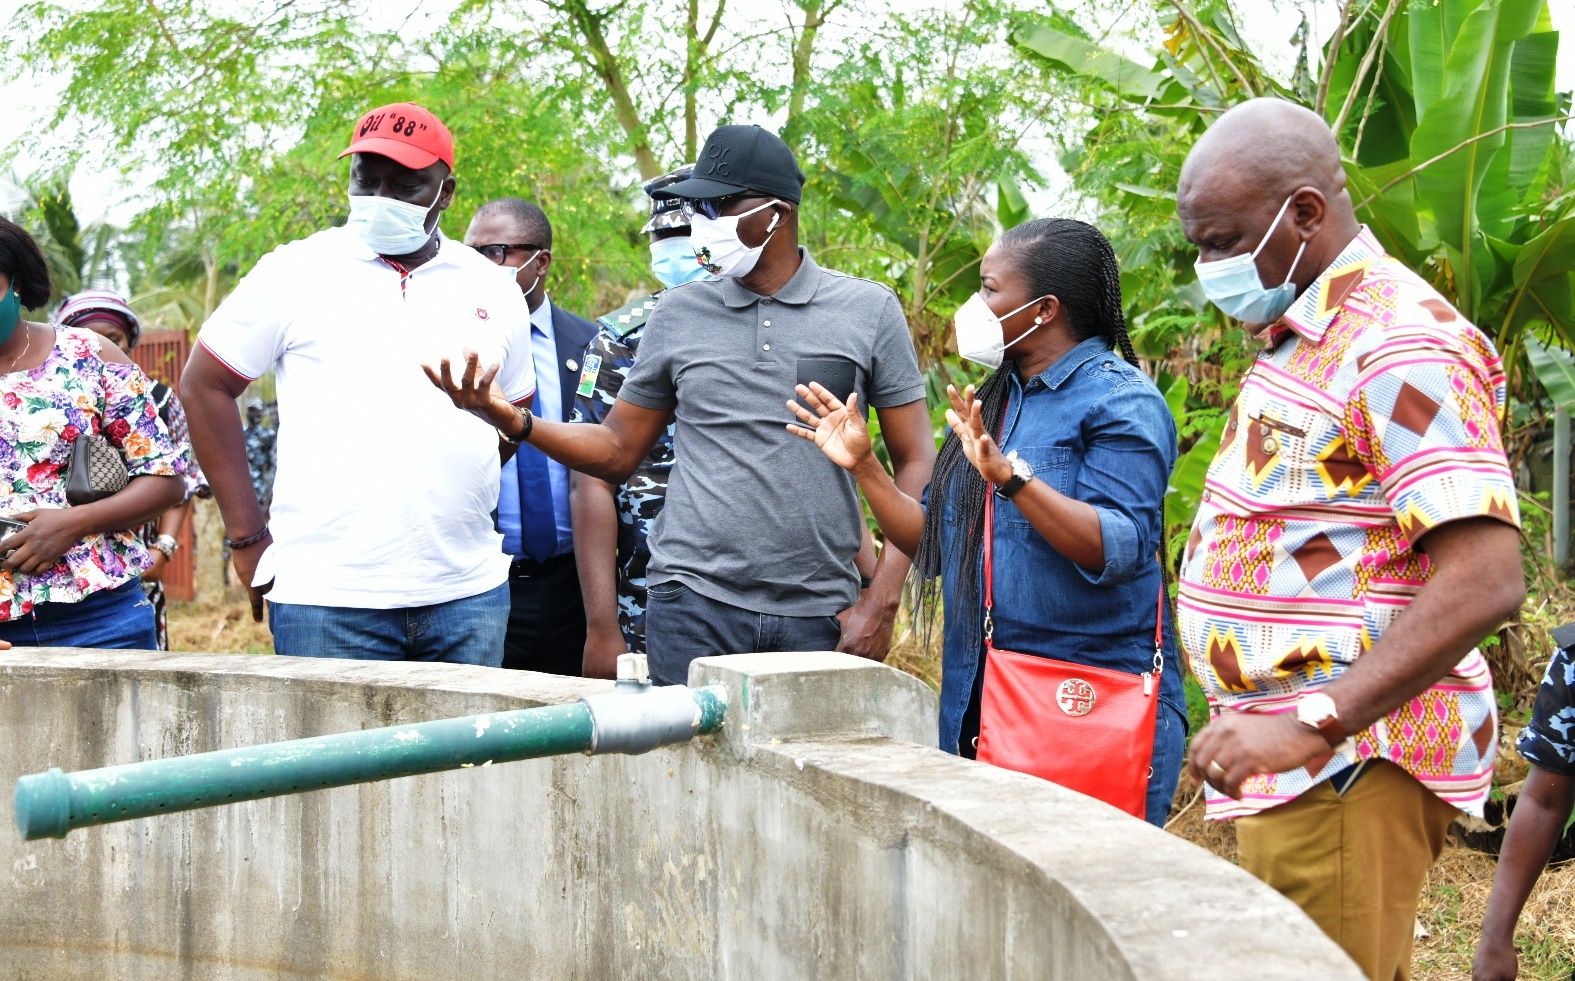 L-R: Member, Lagos State House of Assembly (Badagry Constituency I), Hon. Ibrahim Layode; Governor Babajide Sanwo-Olu; Acting Commissioner for Agriculture, Ms. Bisola Olusanya and Permanent Secretary, Ministry of Agriculture, Dr. Shakirudeen Onasanya during the Governor inspection visit to Avia Farm in Badagry, on Friday, August 7, 2020.